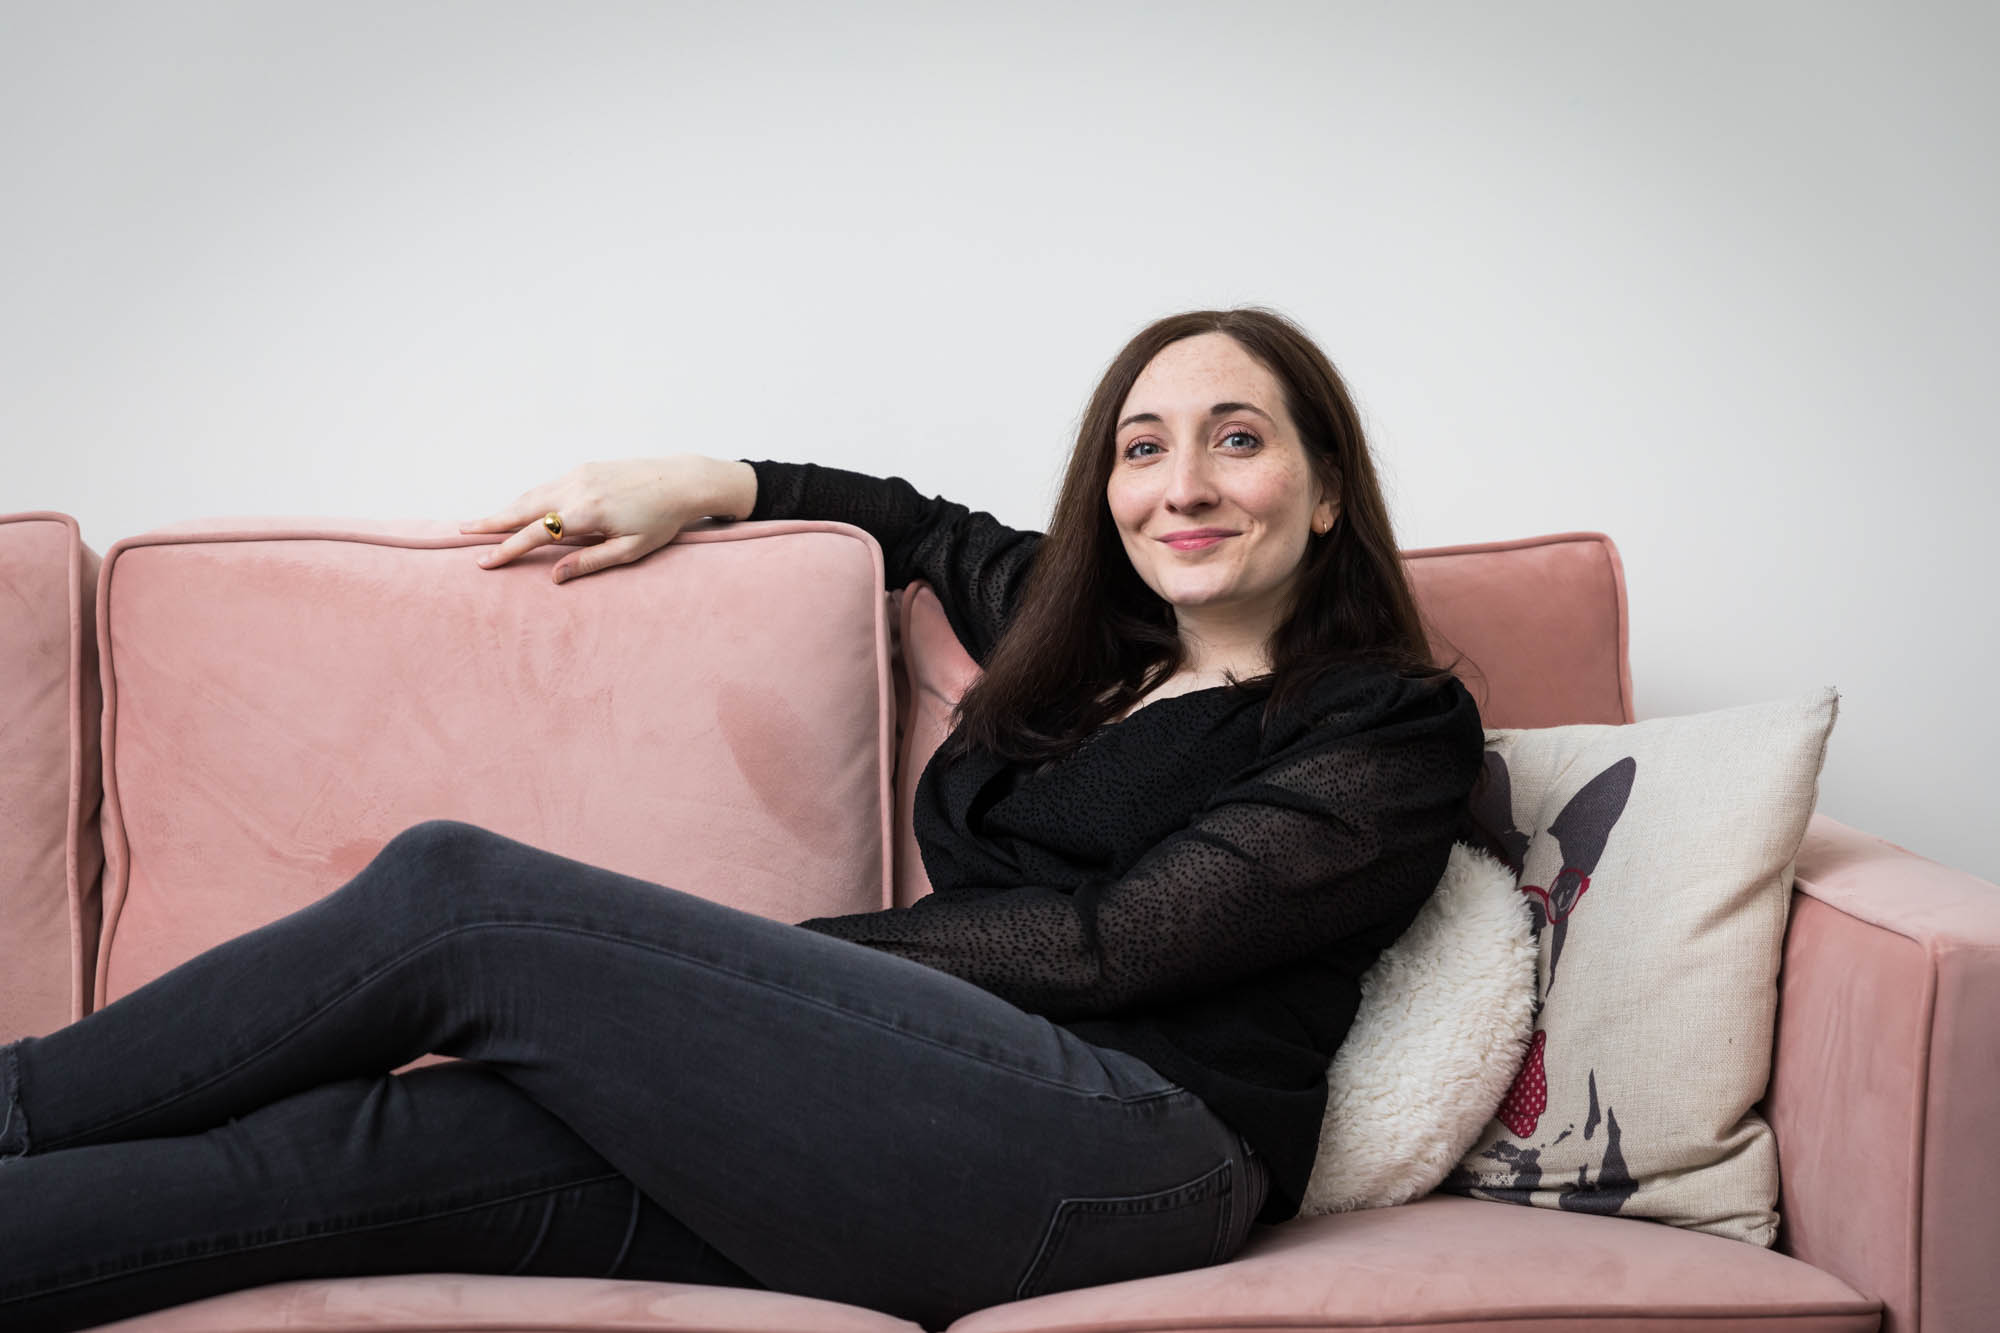 Woman wearing black blouse and black jeans sitting on pink couch